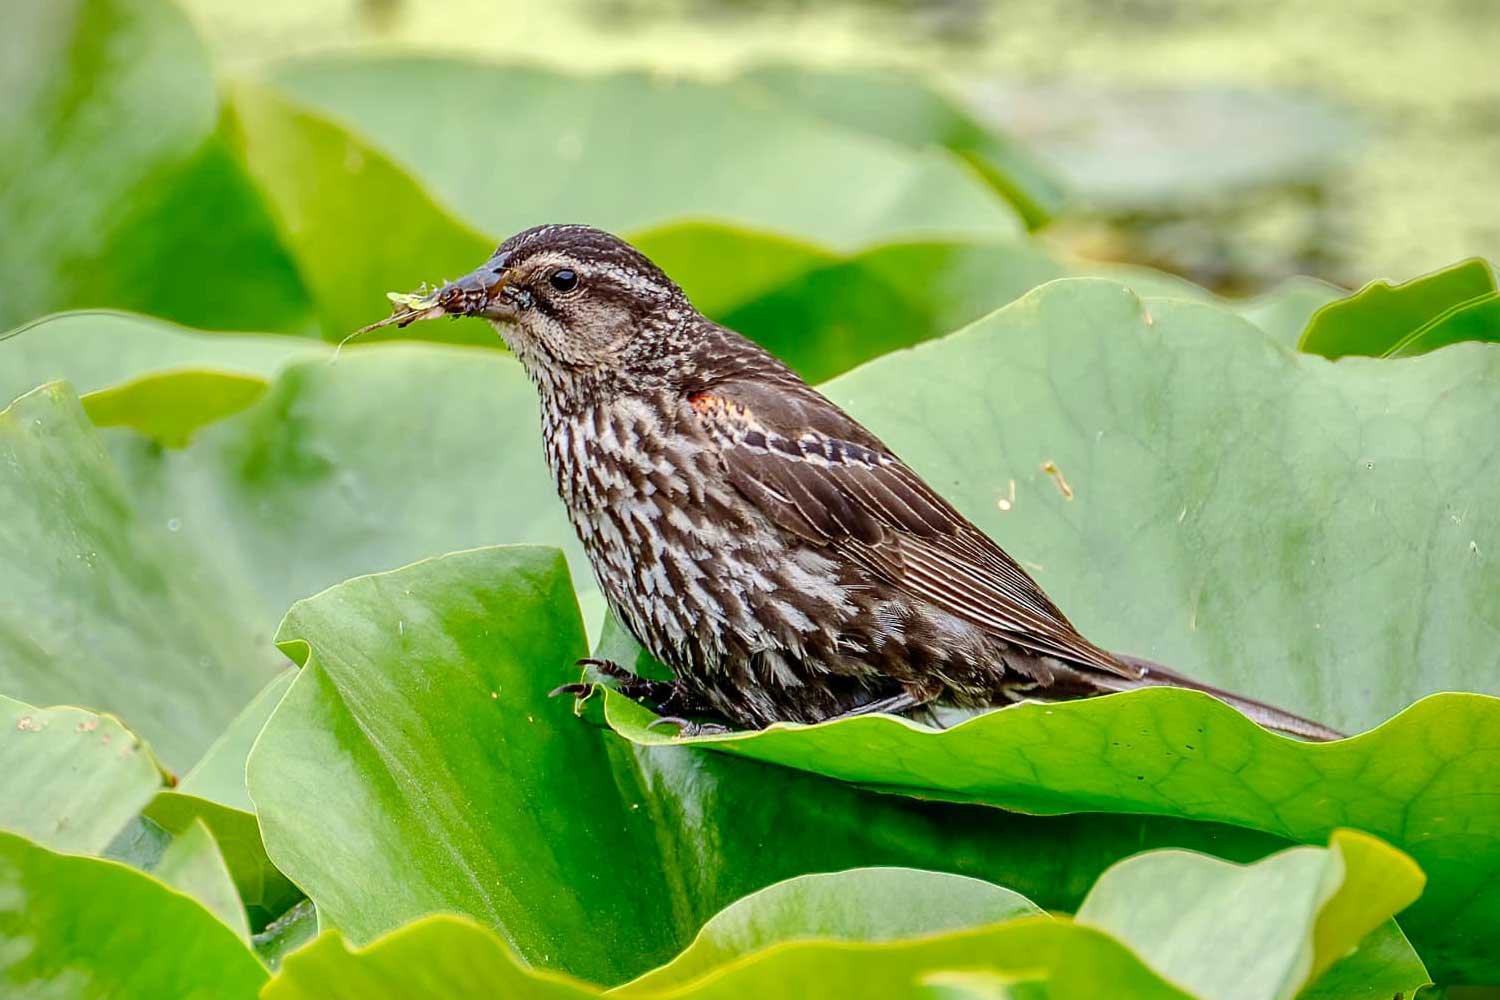 Female red-winged blackbird perched atop vegetation with bug in beak.